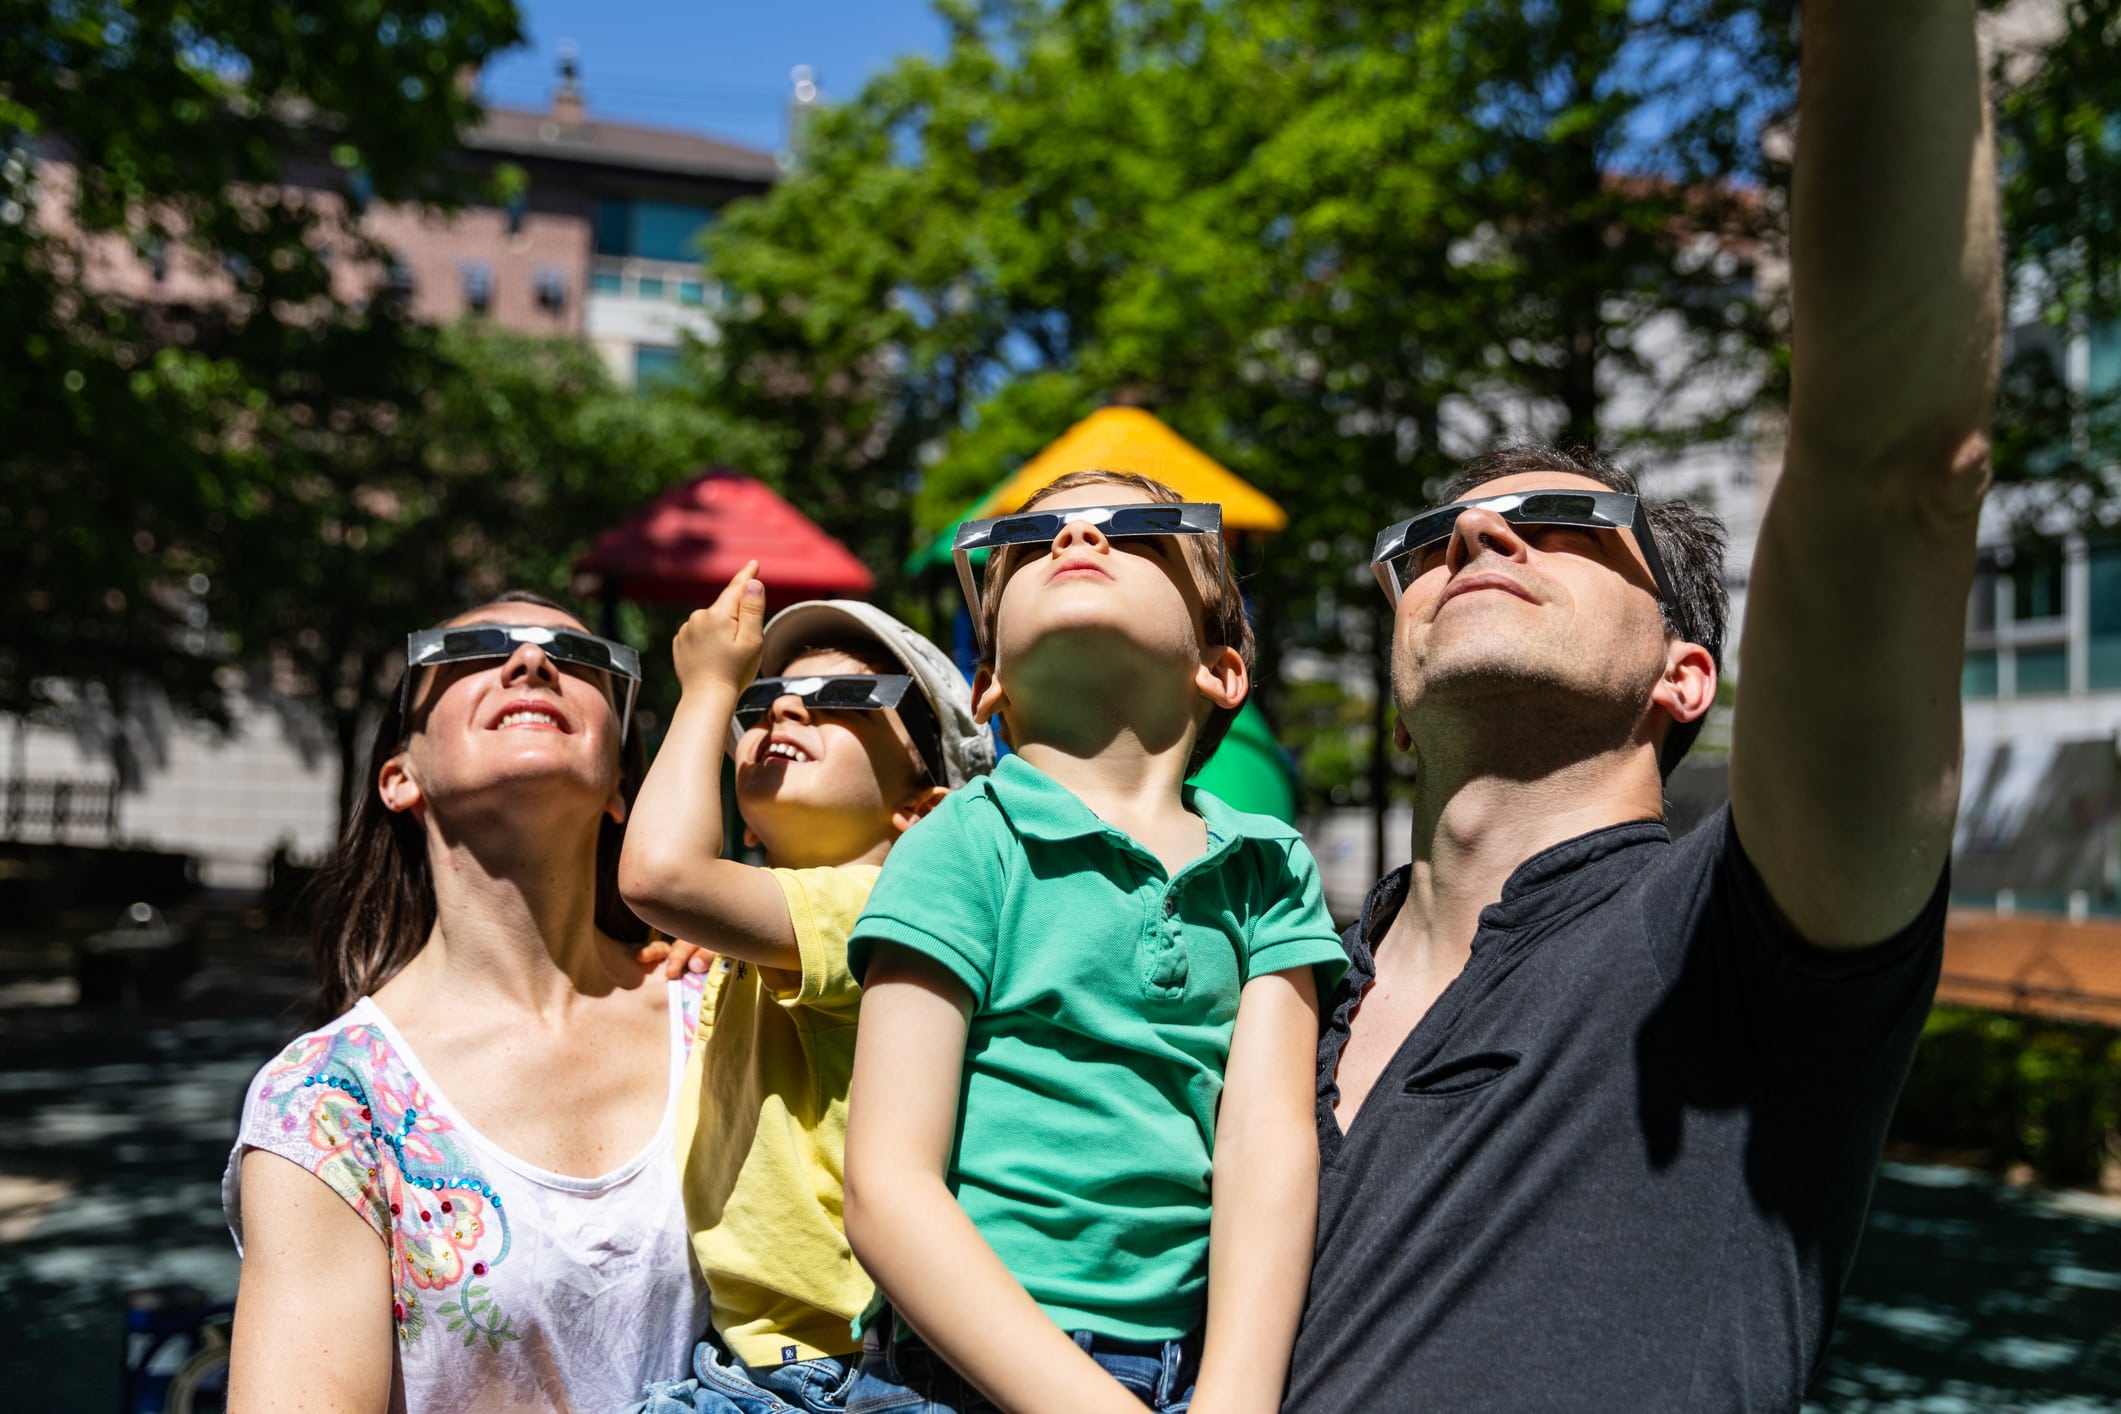 A family looks at a solar eclipse in a public park.